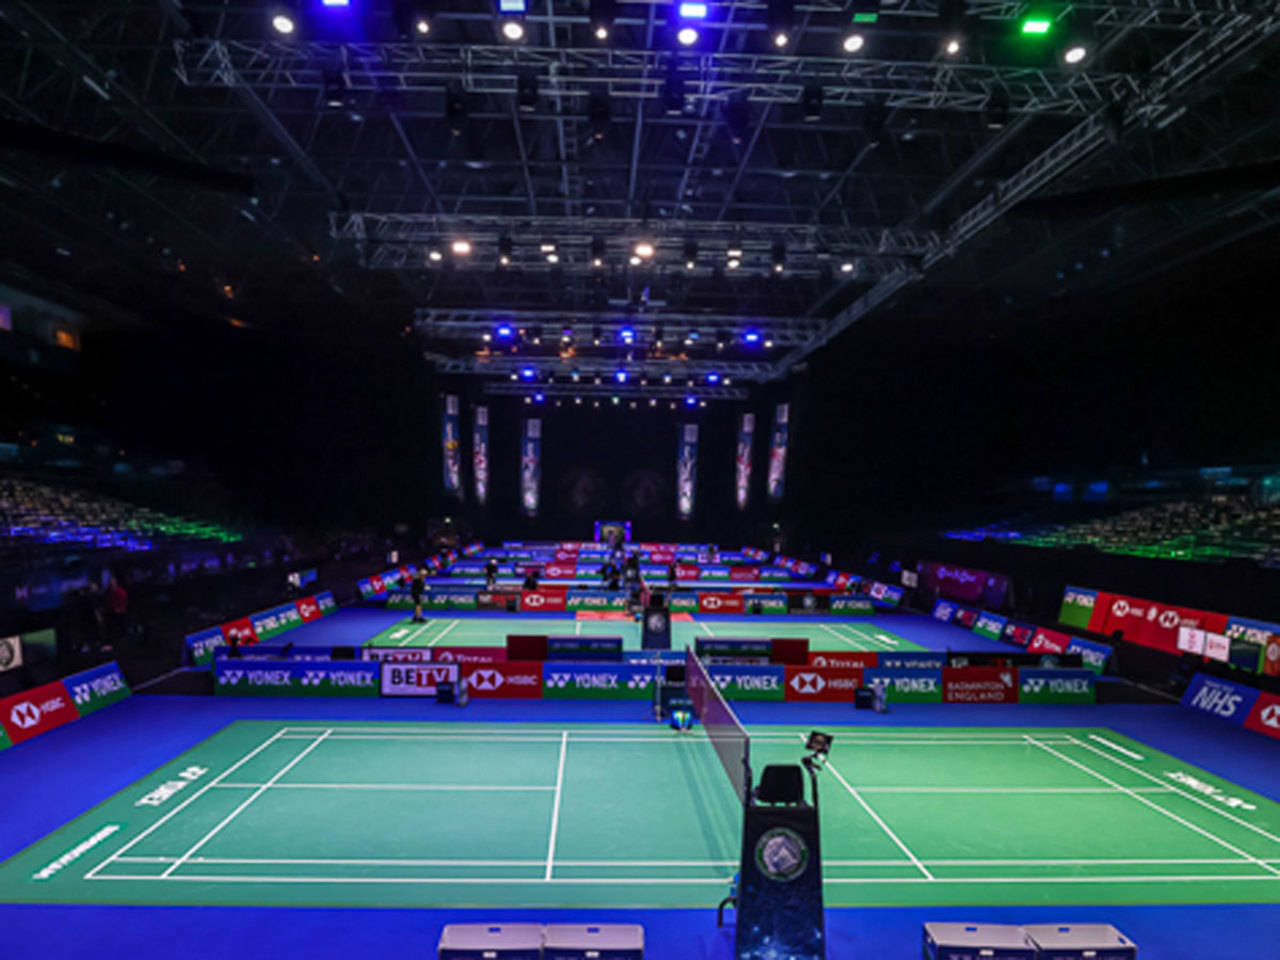 Indonesian team pulls out of ongoing All England Championships after Covid-19 case in flight Badminton News